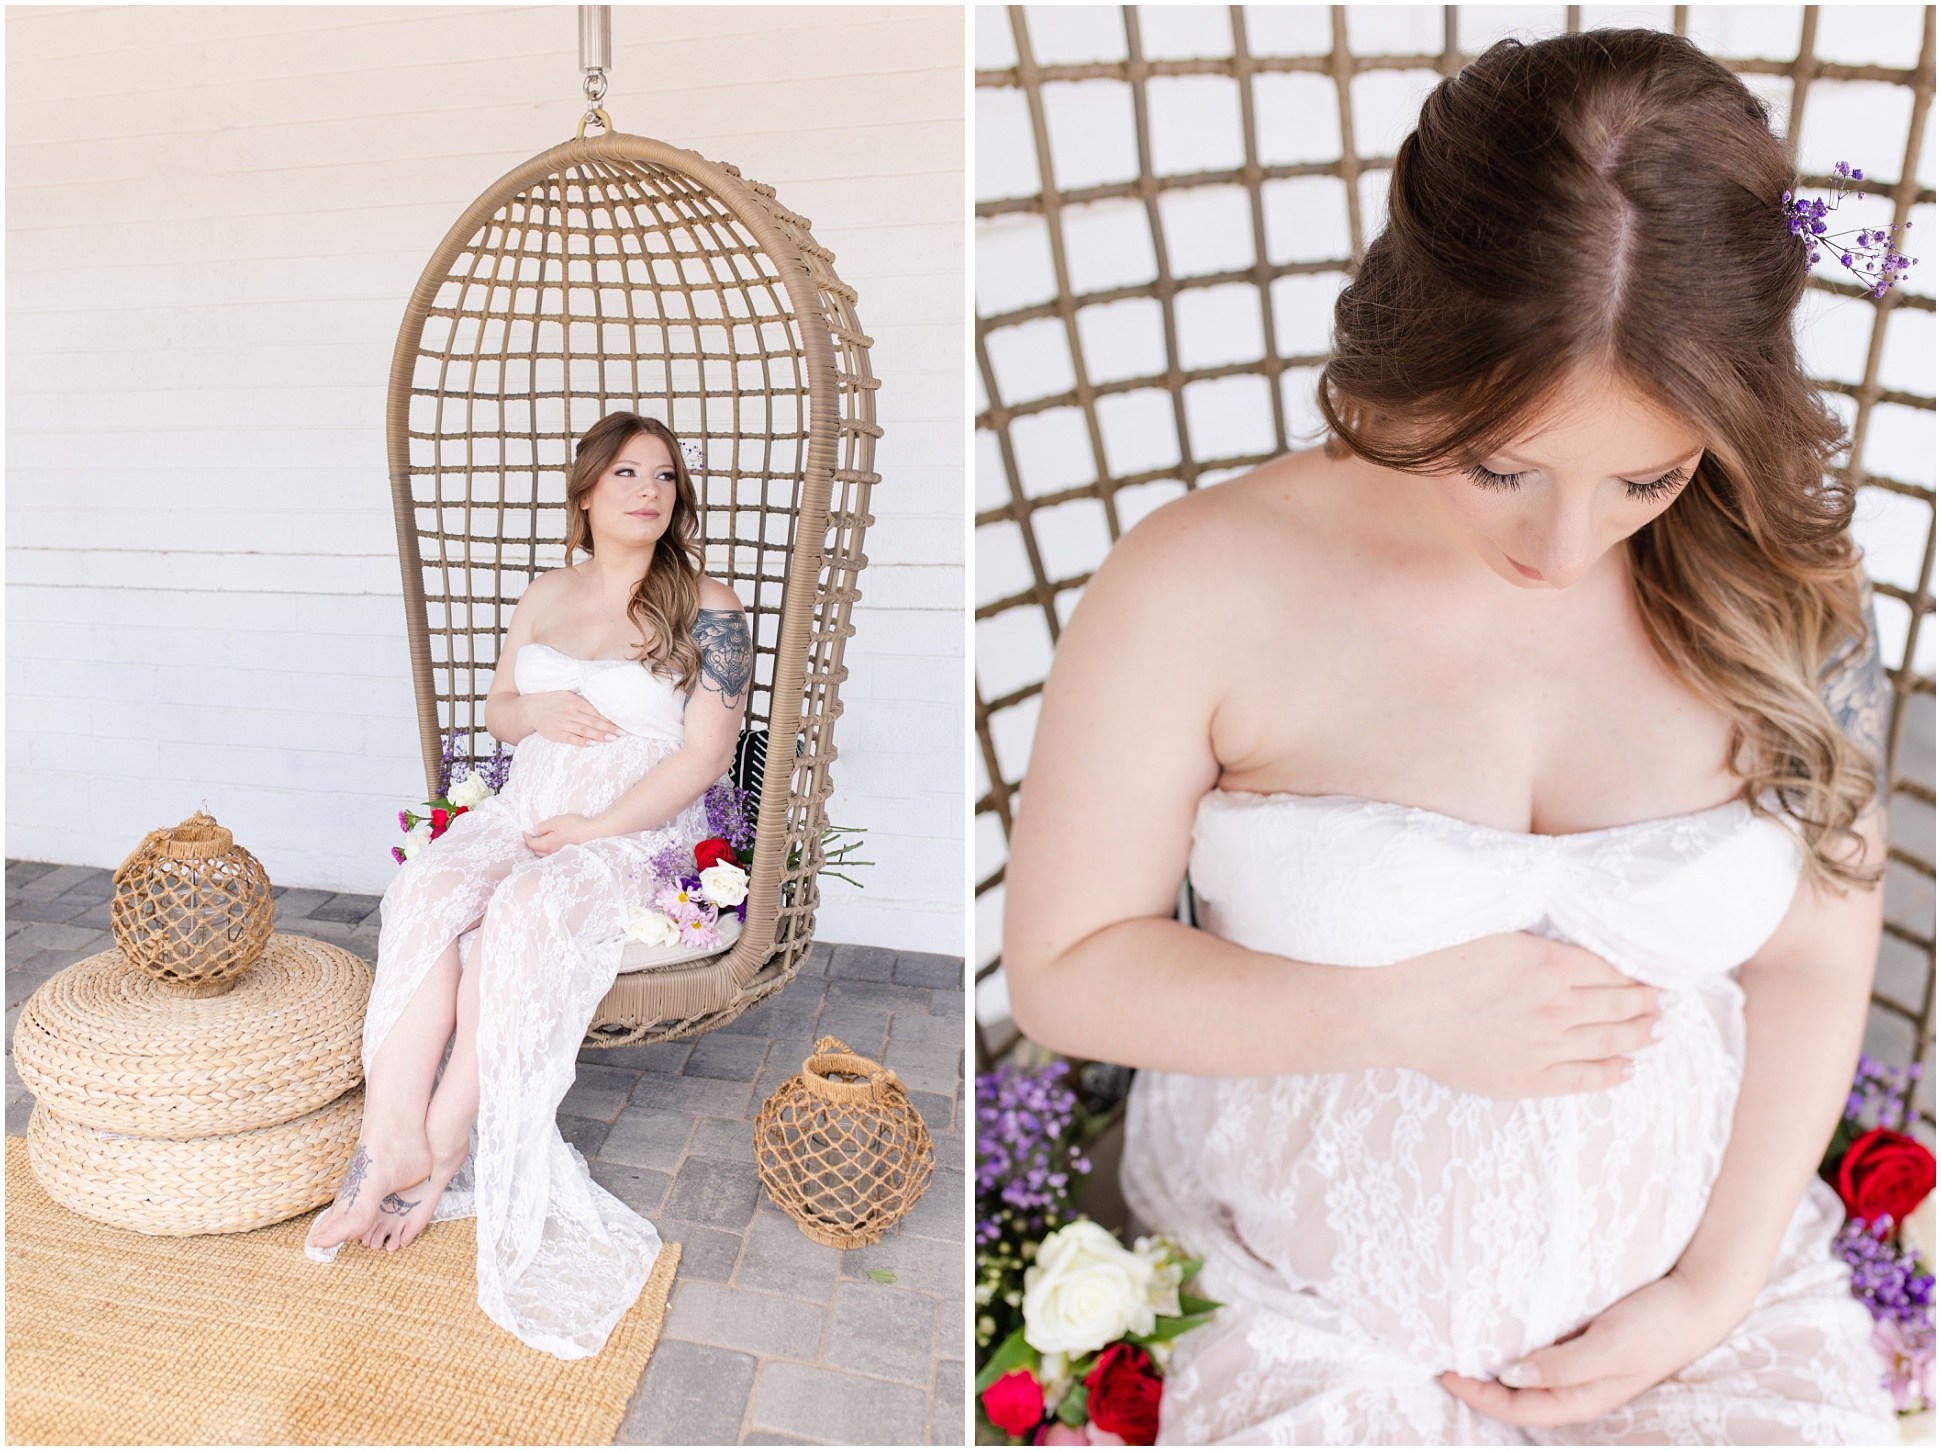 Two Images of Mom to Be Sitting with her Baby Bump in a Hanging Egg Chair